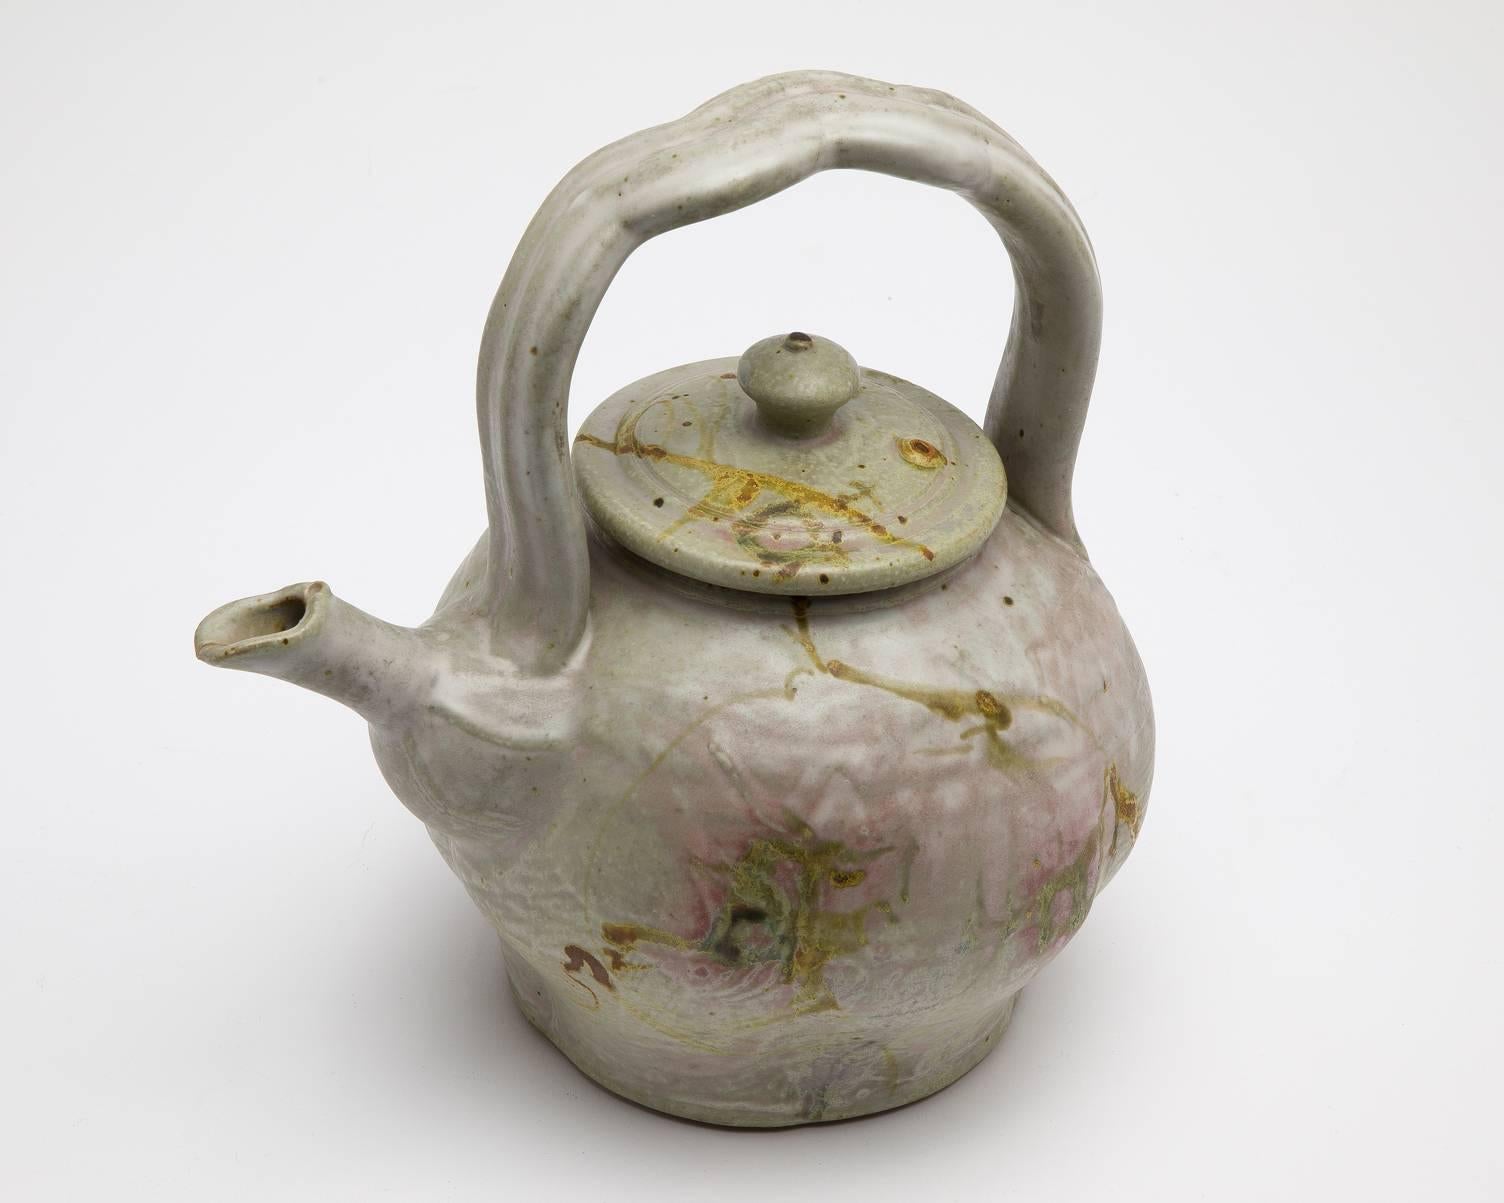 American John Glick studio pottery teapot and cover of globular form with an Asian-inspired arched handle. The teapot body lightly-lobed and decorated with delicate lines and patterns, the body delicately painted with washy brown and pink